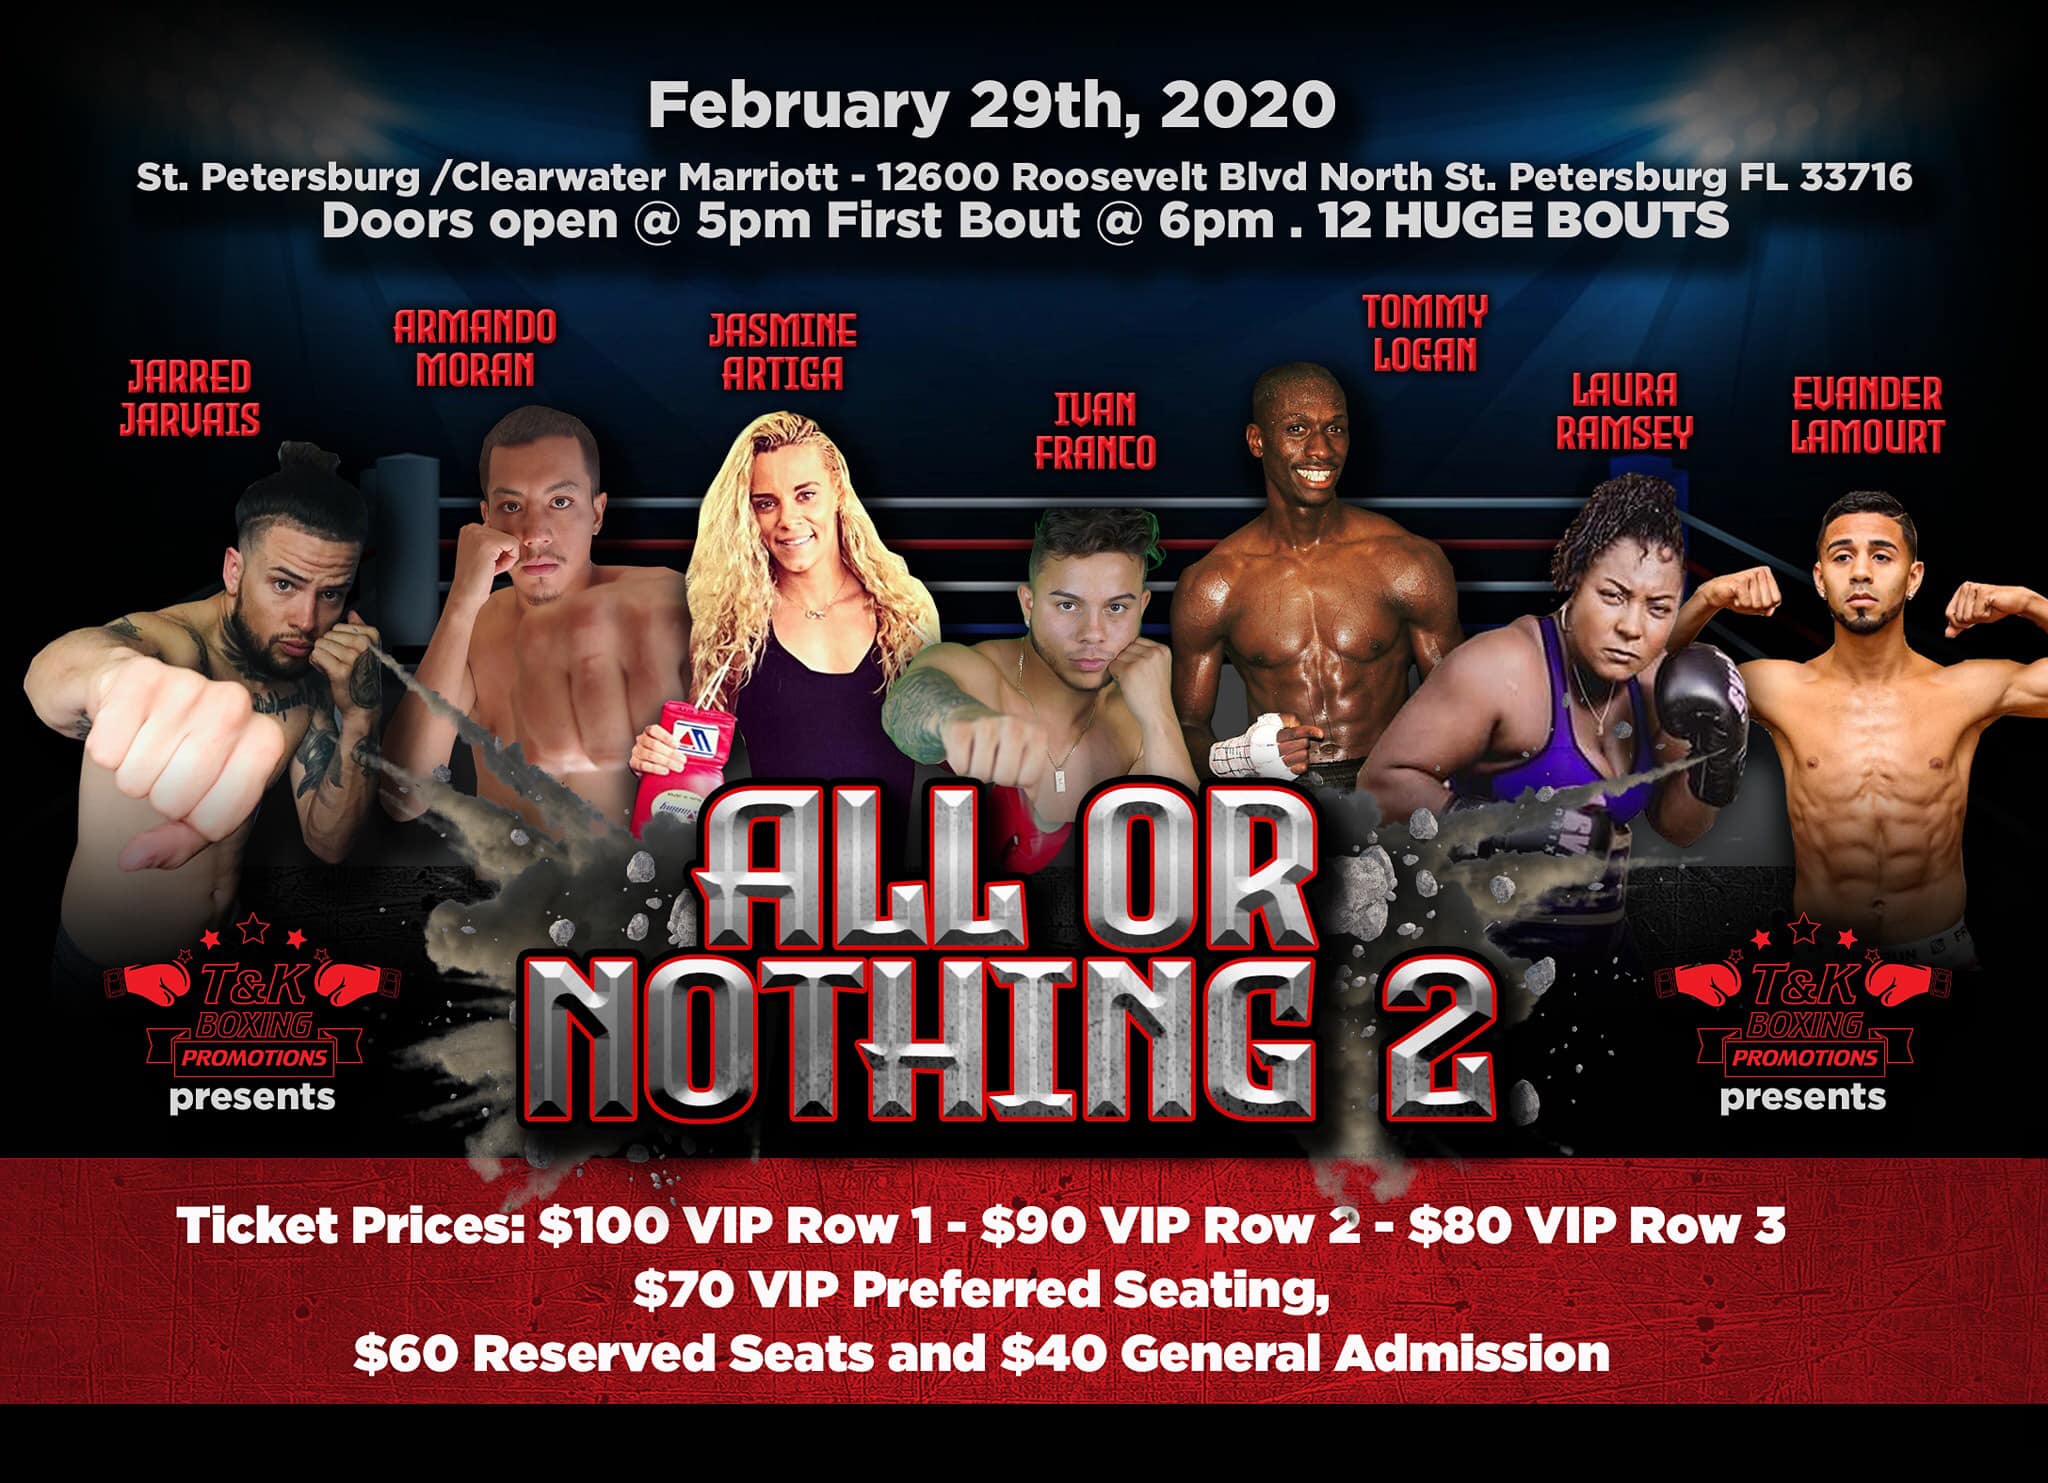 Laura Ramsey and Gwendolyn ONeil Rematch Set for February 29